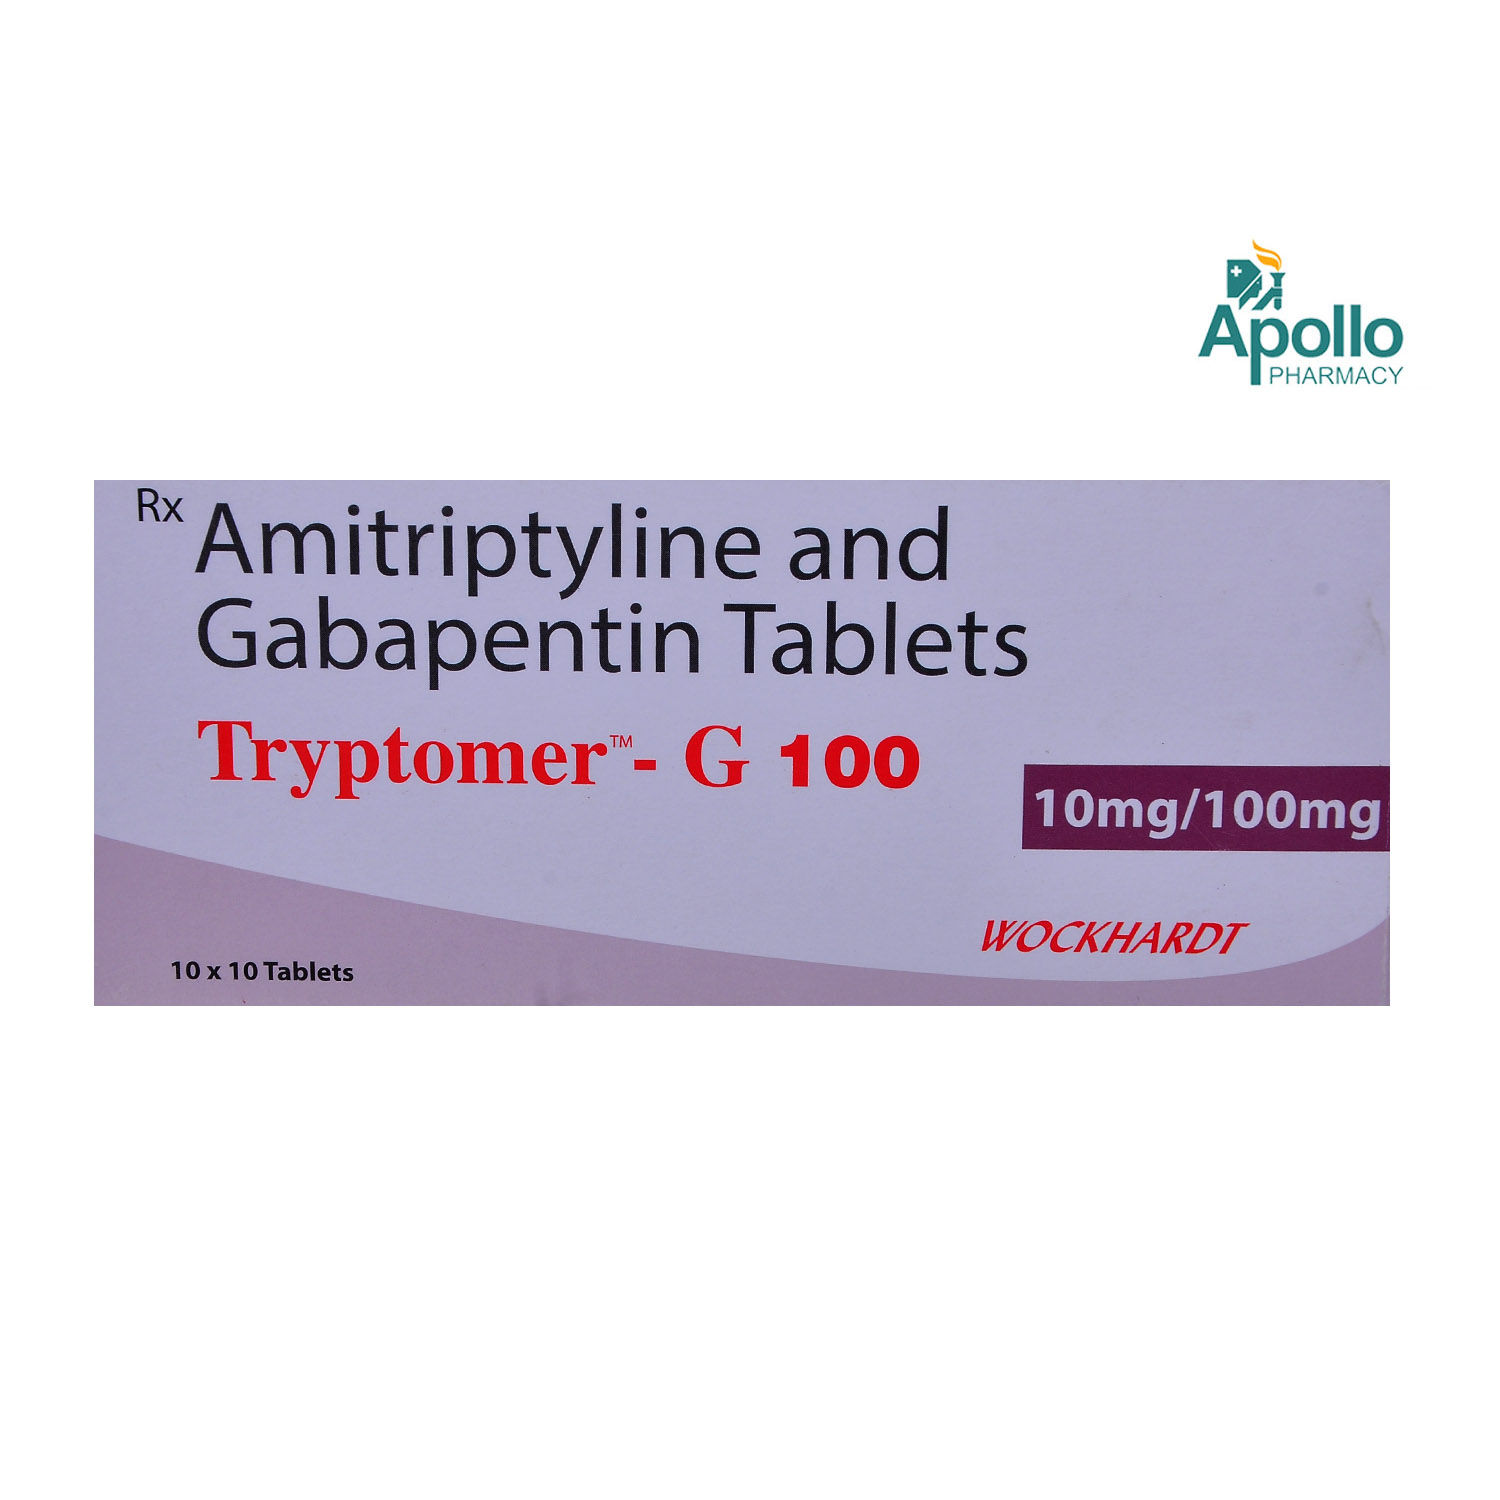 Tryptomer-G 100 Tablet 10's, Pack of 10 TABLETS